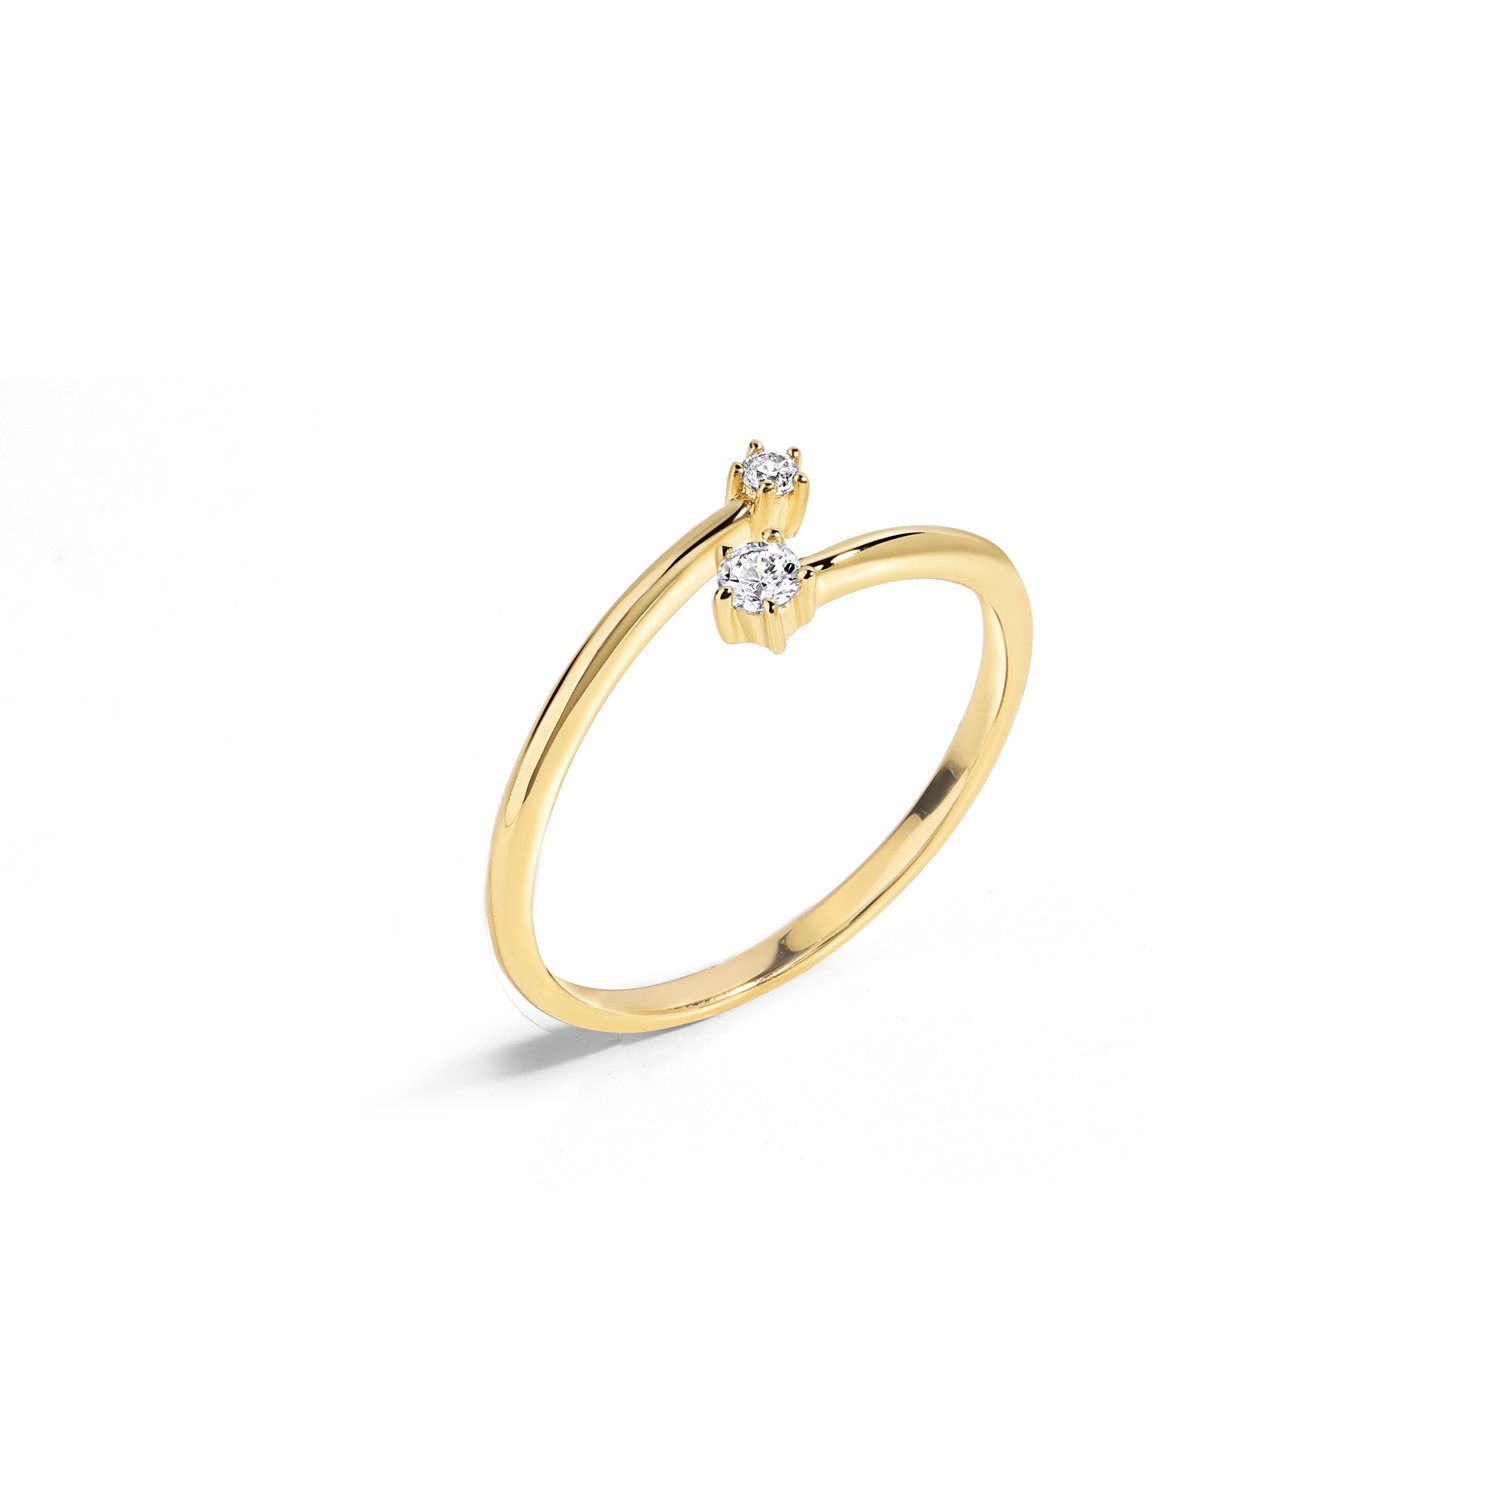 Delicate and elegant ring in gold with cubic zirconia. 